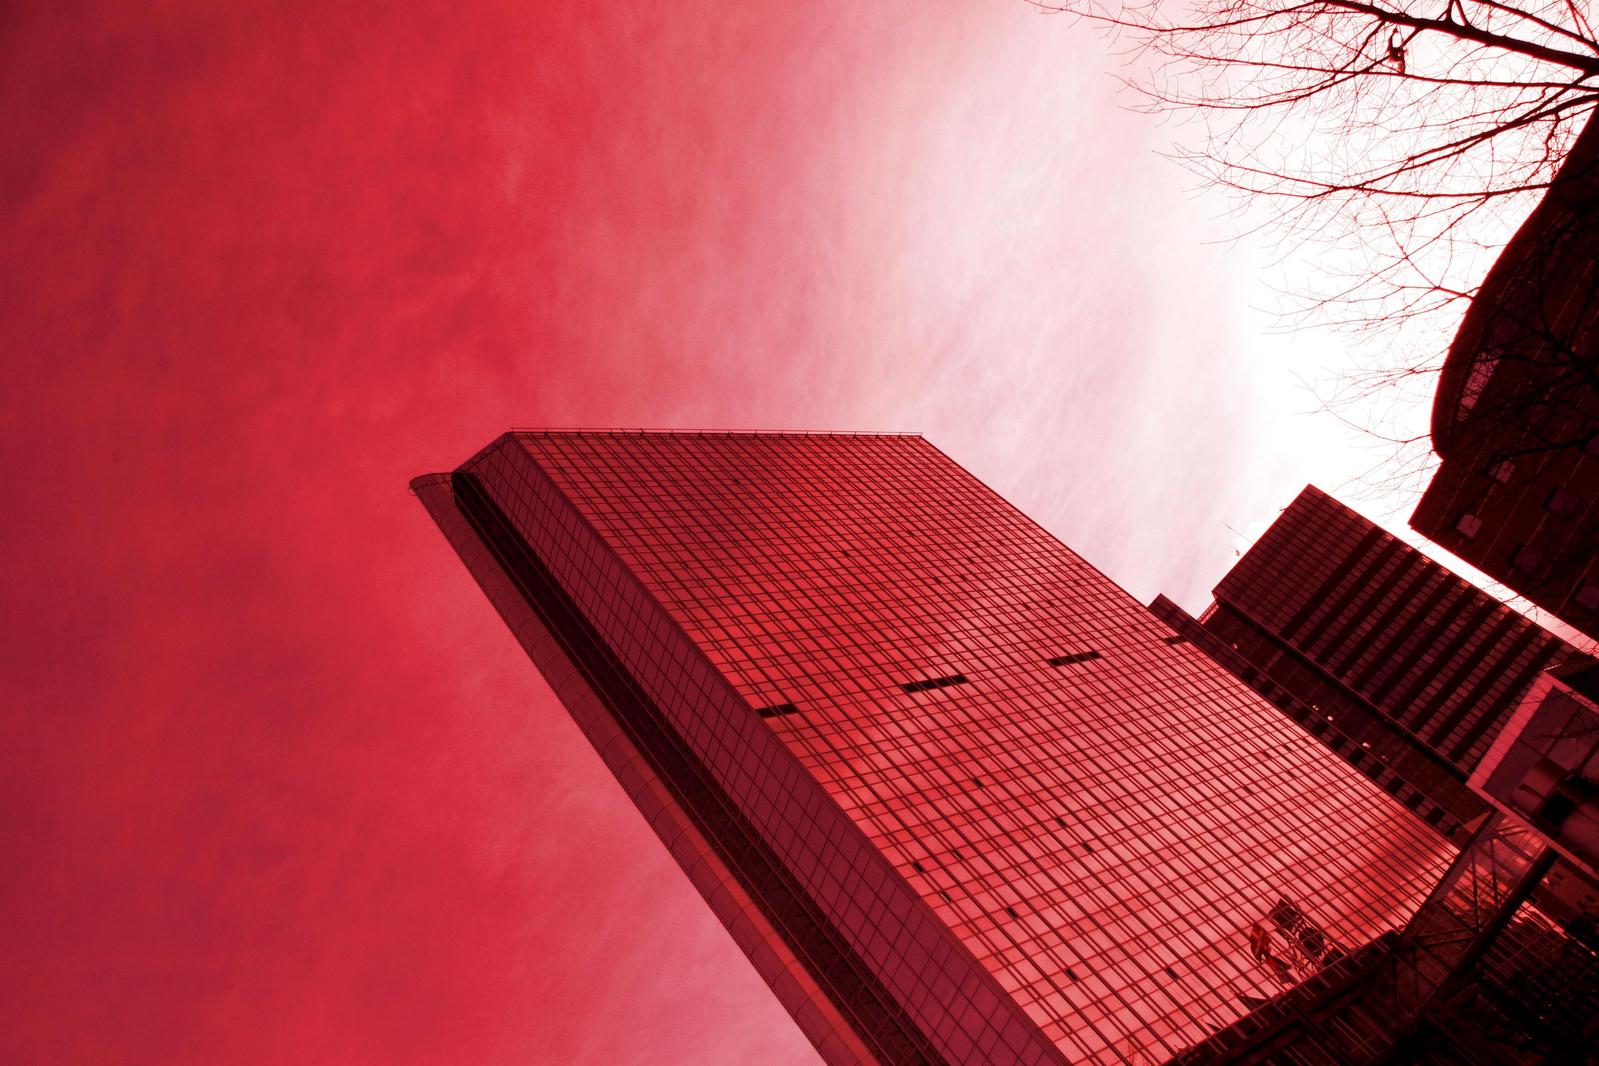 a tall red building with trees in the foreground